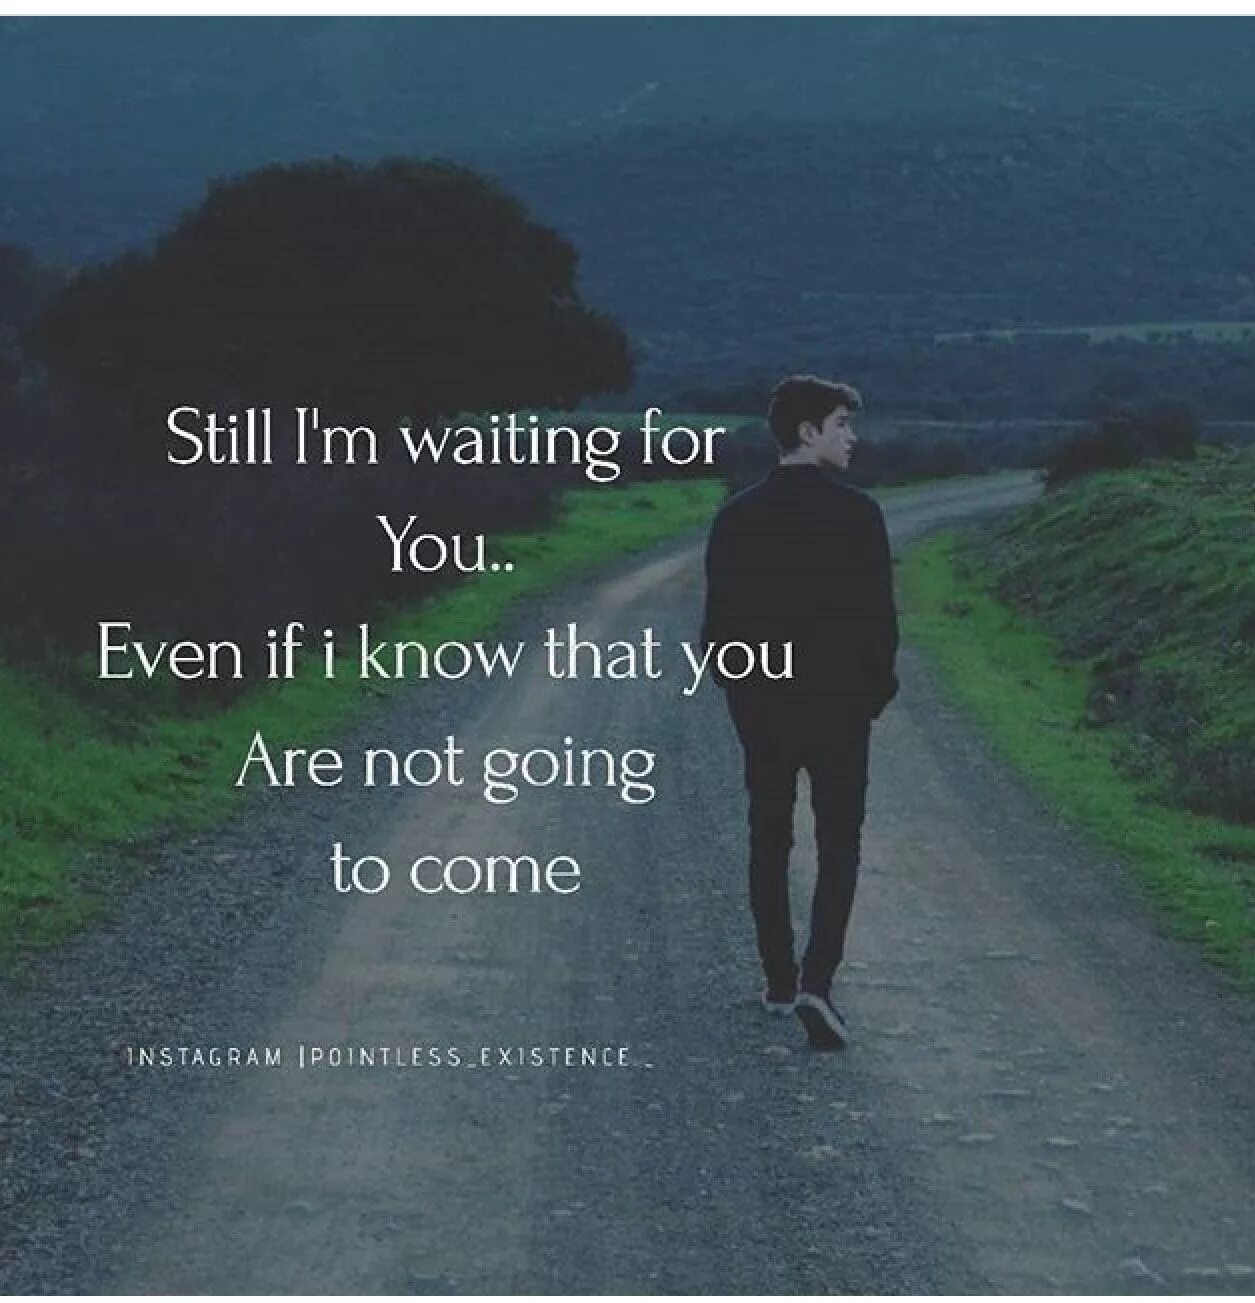 Wait for me down. I waiting for you. I'M waiting for you. Im still waiting for you. Still waiting for you.